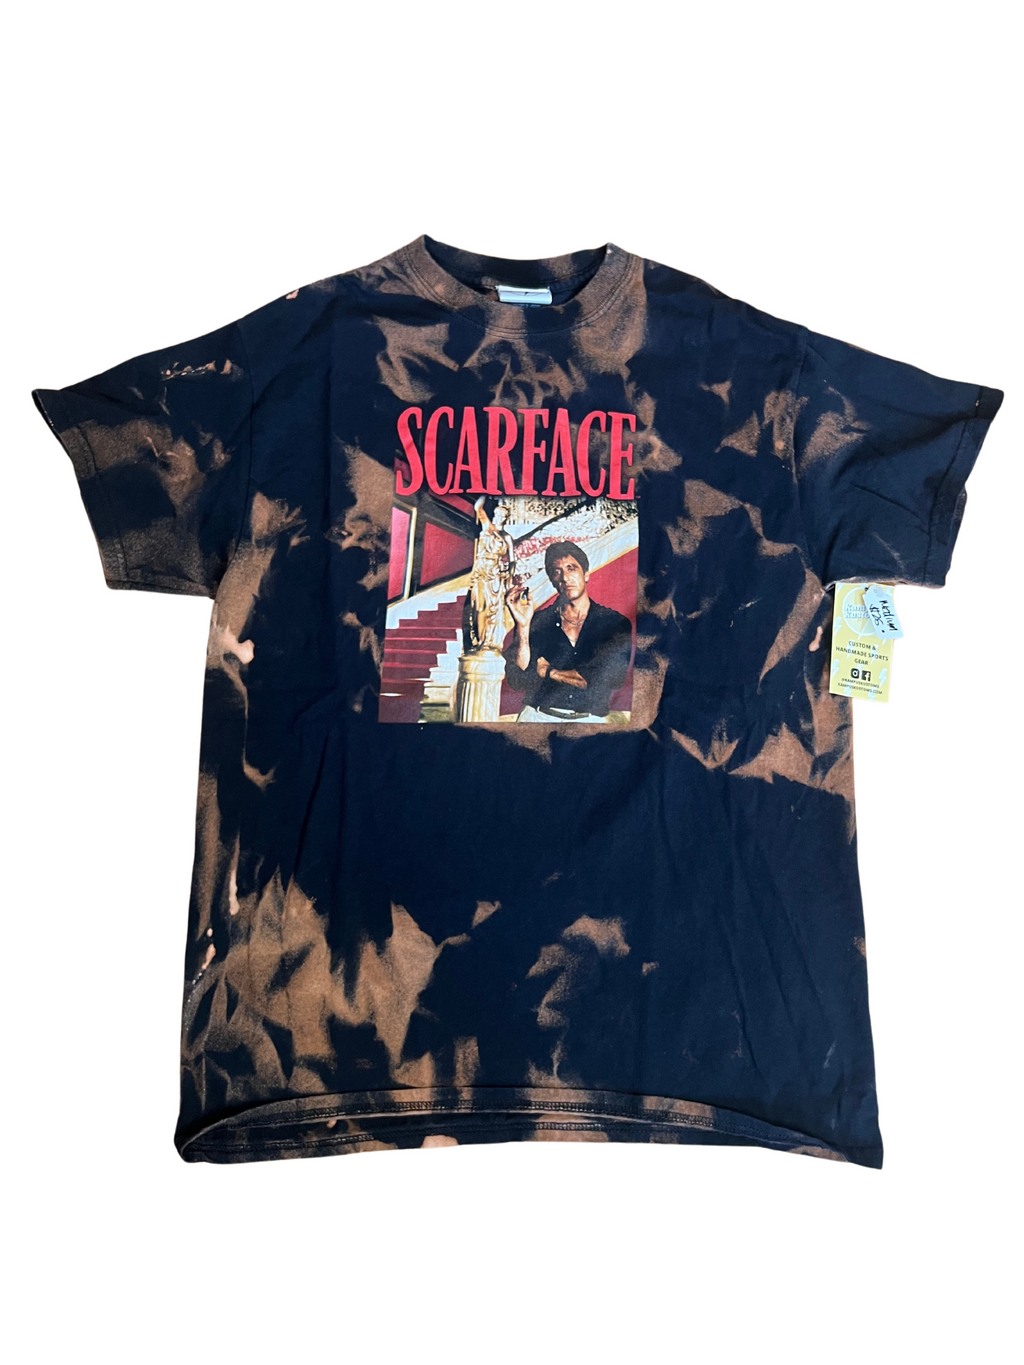 Scarface Bleached Shirt